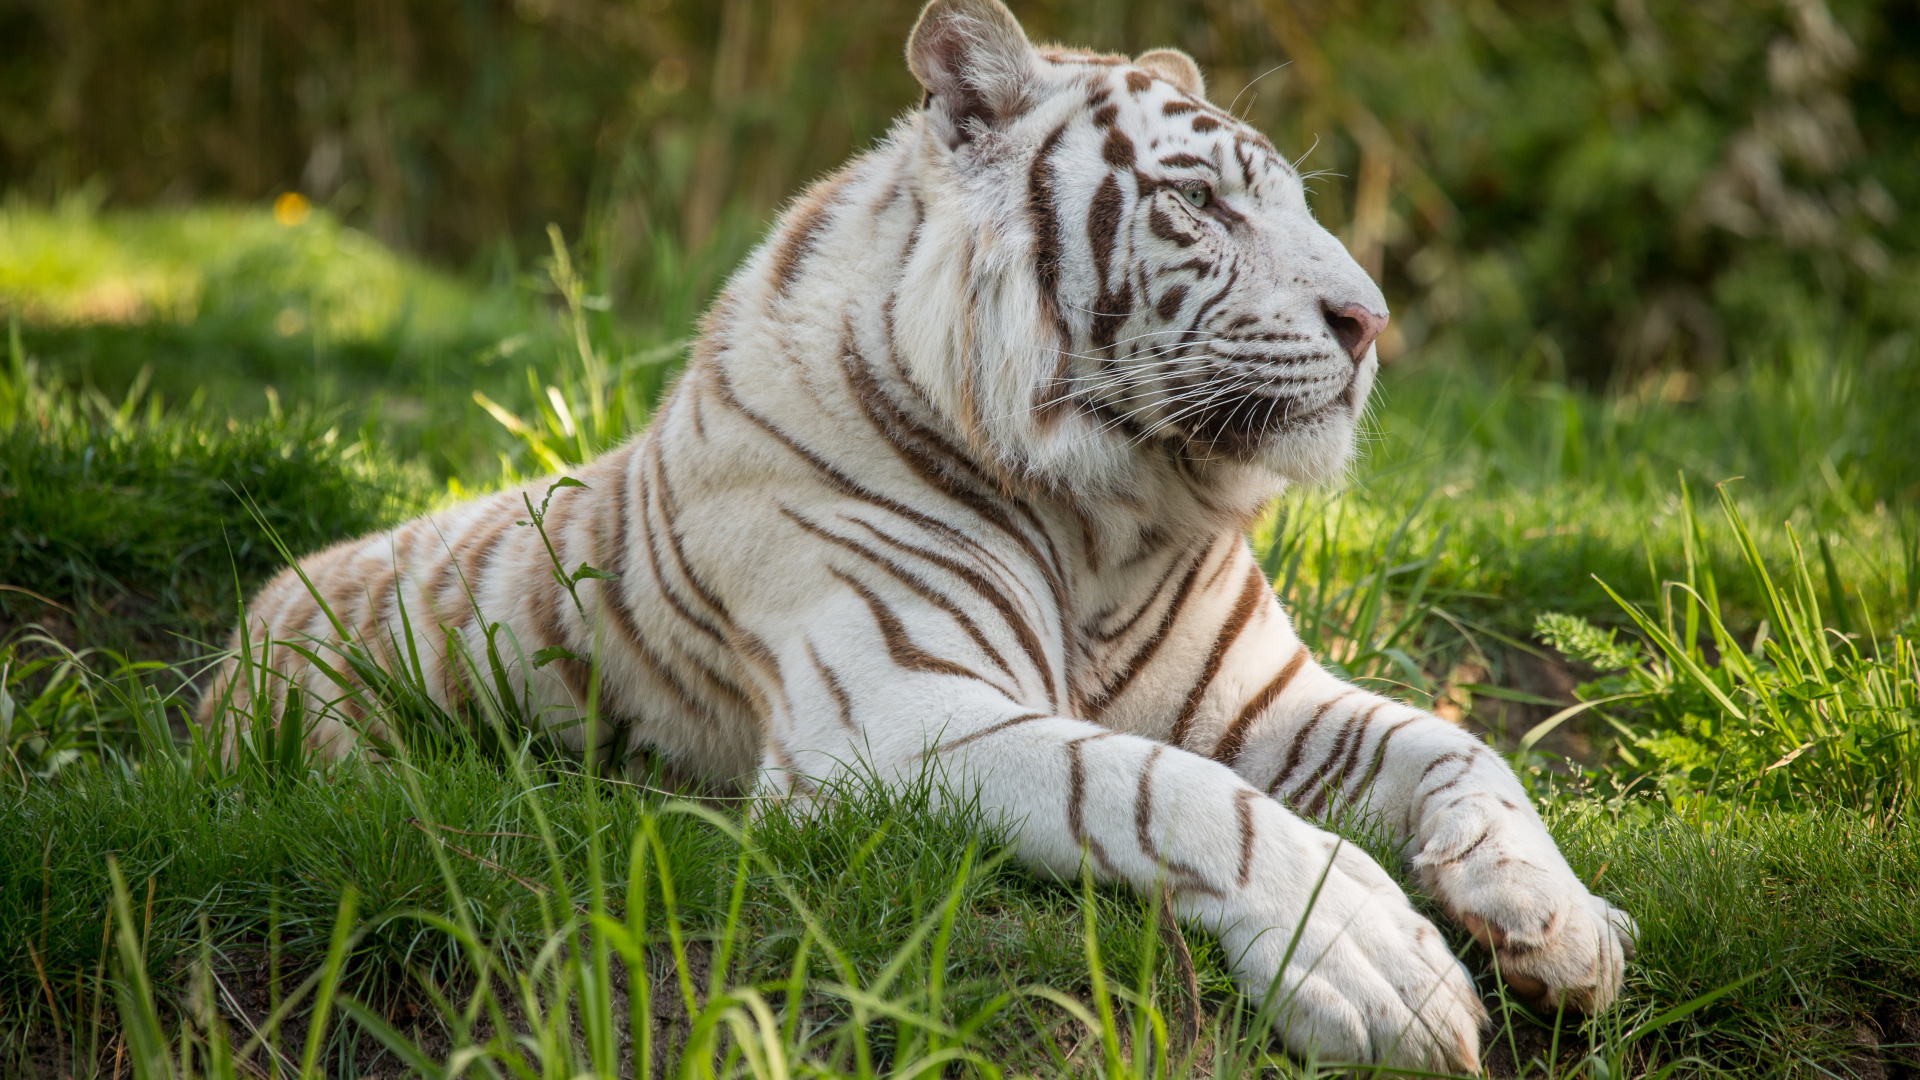 White and Black Tiger Lying on Green Grass During Daytime. Wallpaper in 1920x1080 Resolution